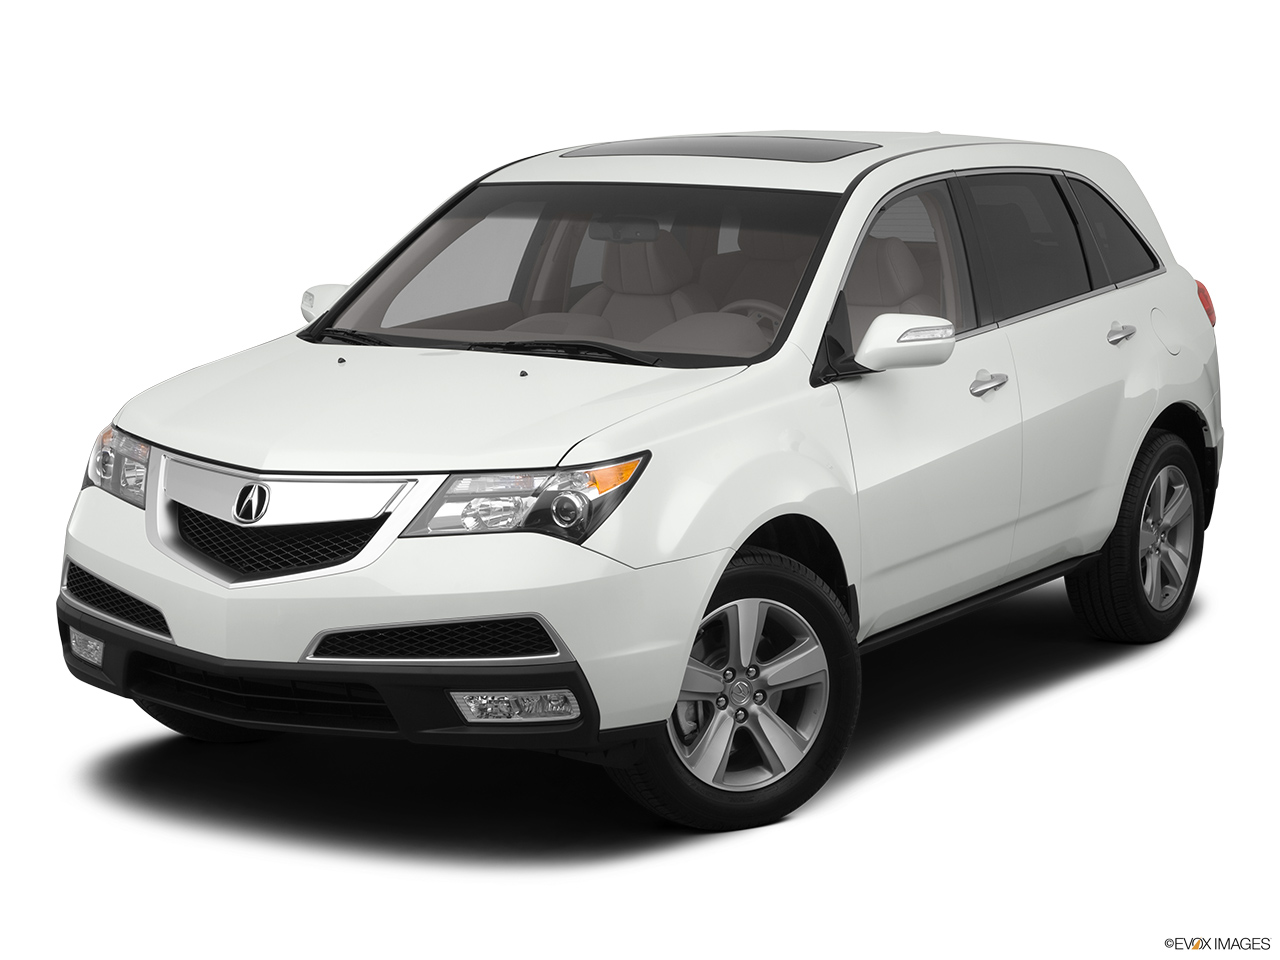 2012 Acura MDX MDX Front angle view. 